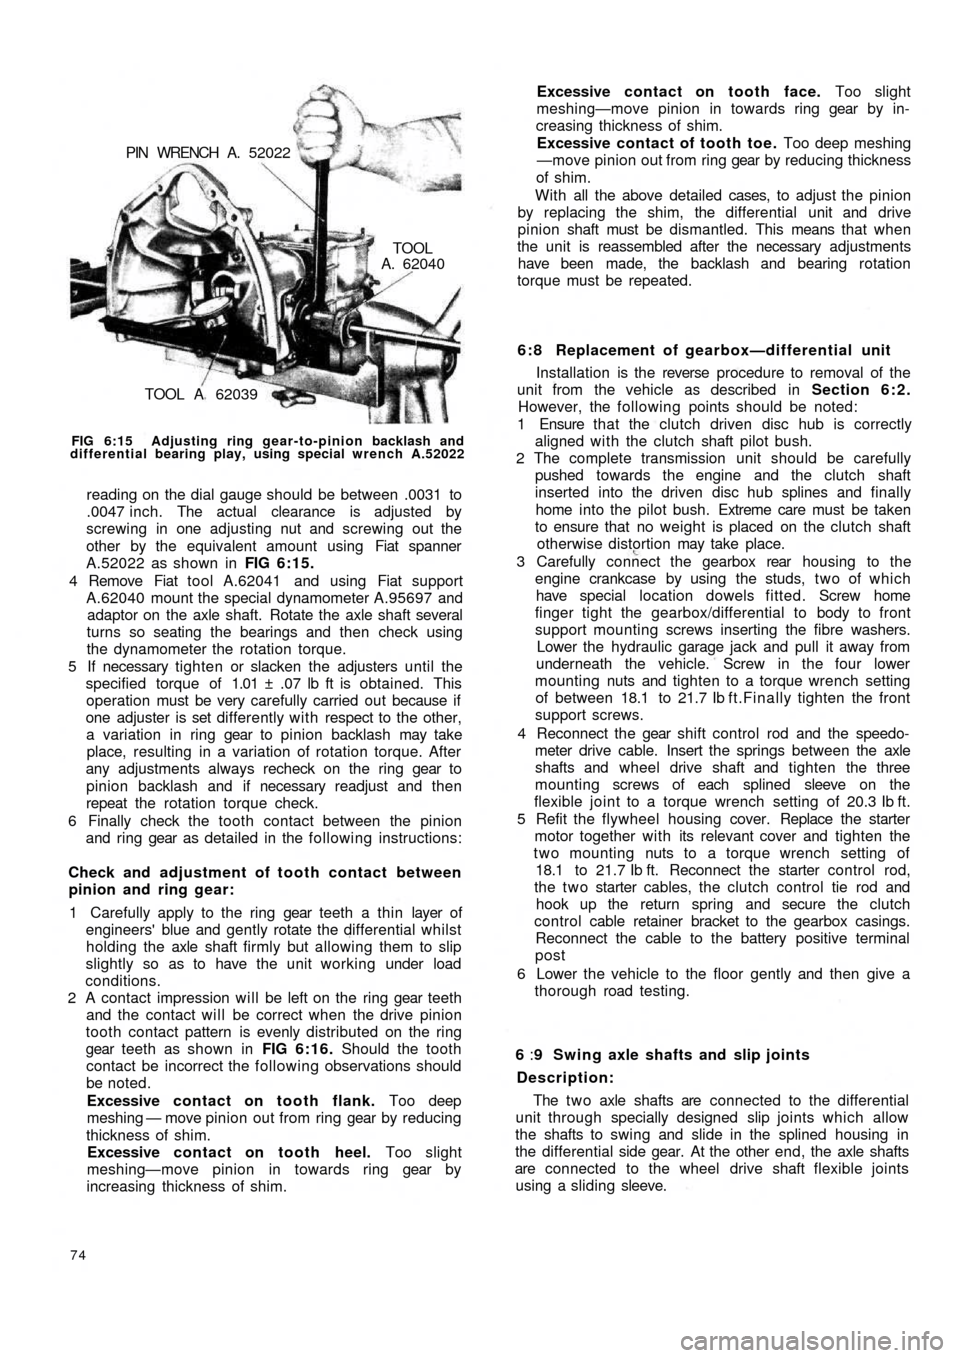 FIAT 500 1960 1.G Workshop Manual TOOL A  62039
TOOLA. 62040 PIN  WRENCH  A.  52022
FIG 6:15  Adjusting ring gear-to-pinion backlash and
differential bearing play, using special wrench A.52022
reading on the dial gauge should be betwe